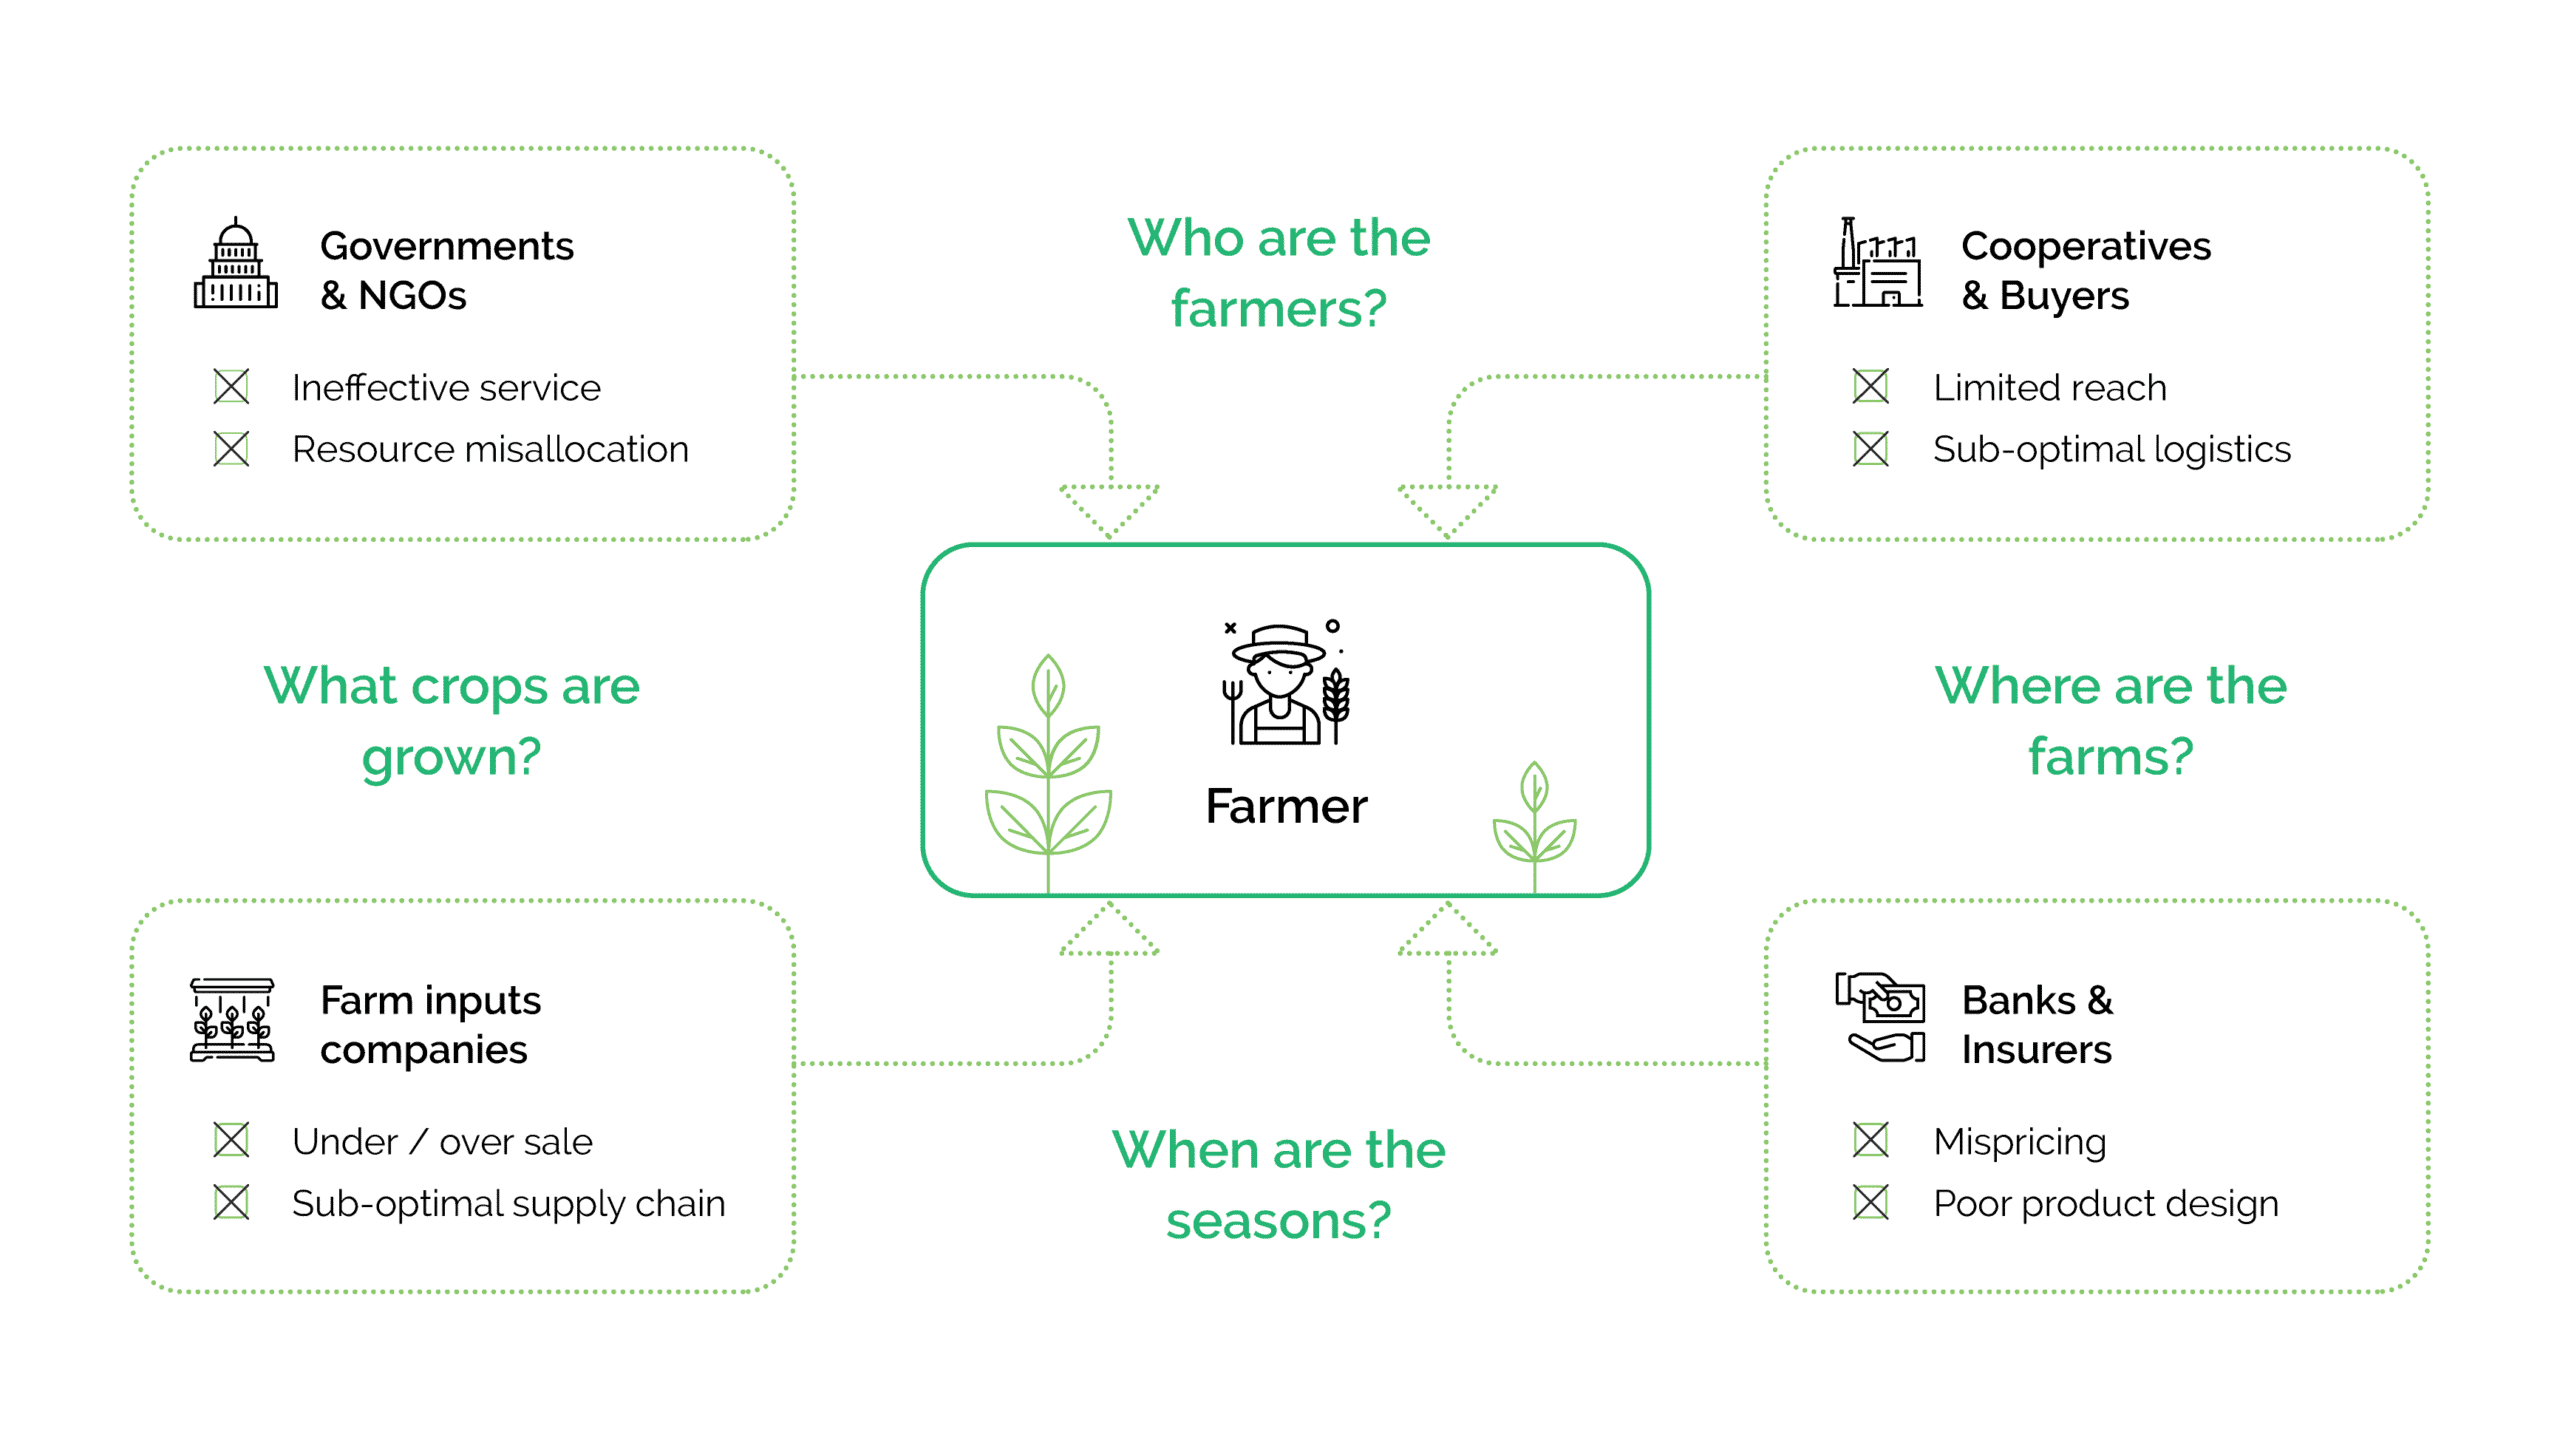 A diagram showing the ecosystem of smallholder farmers